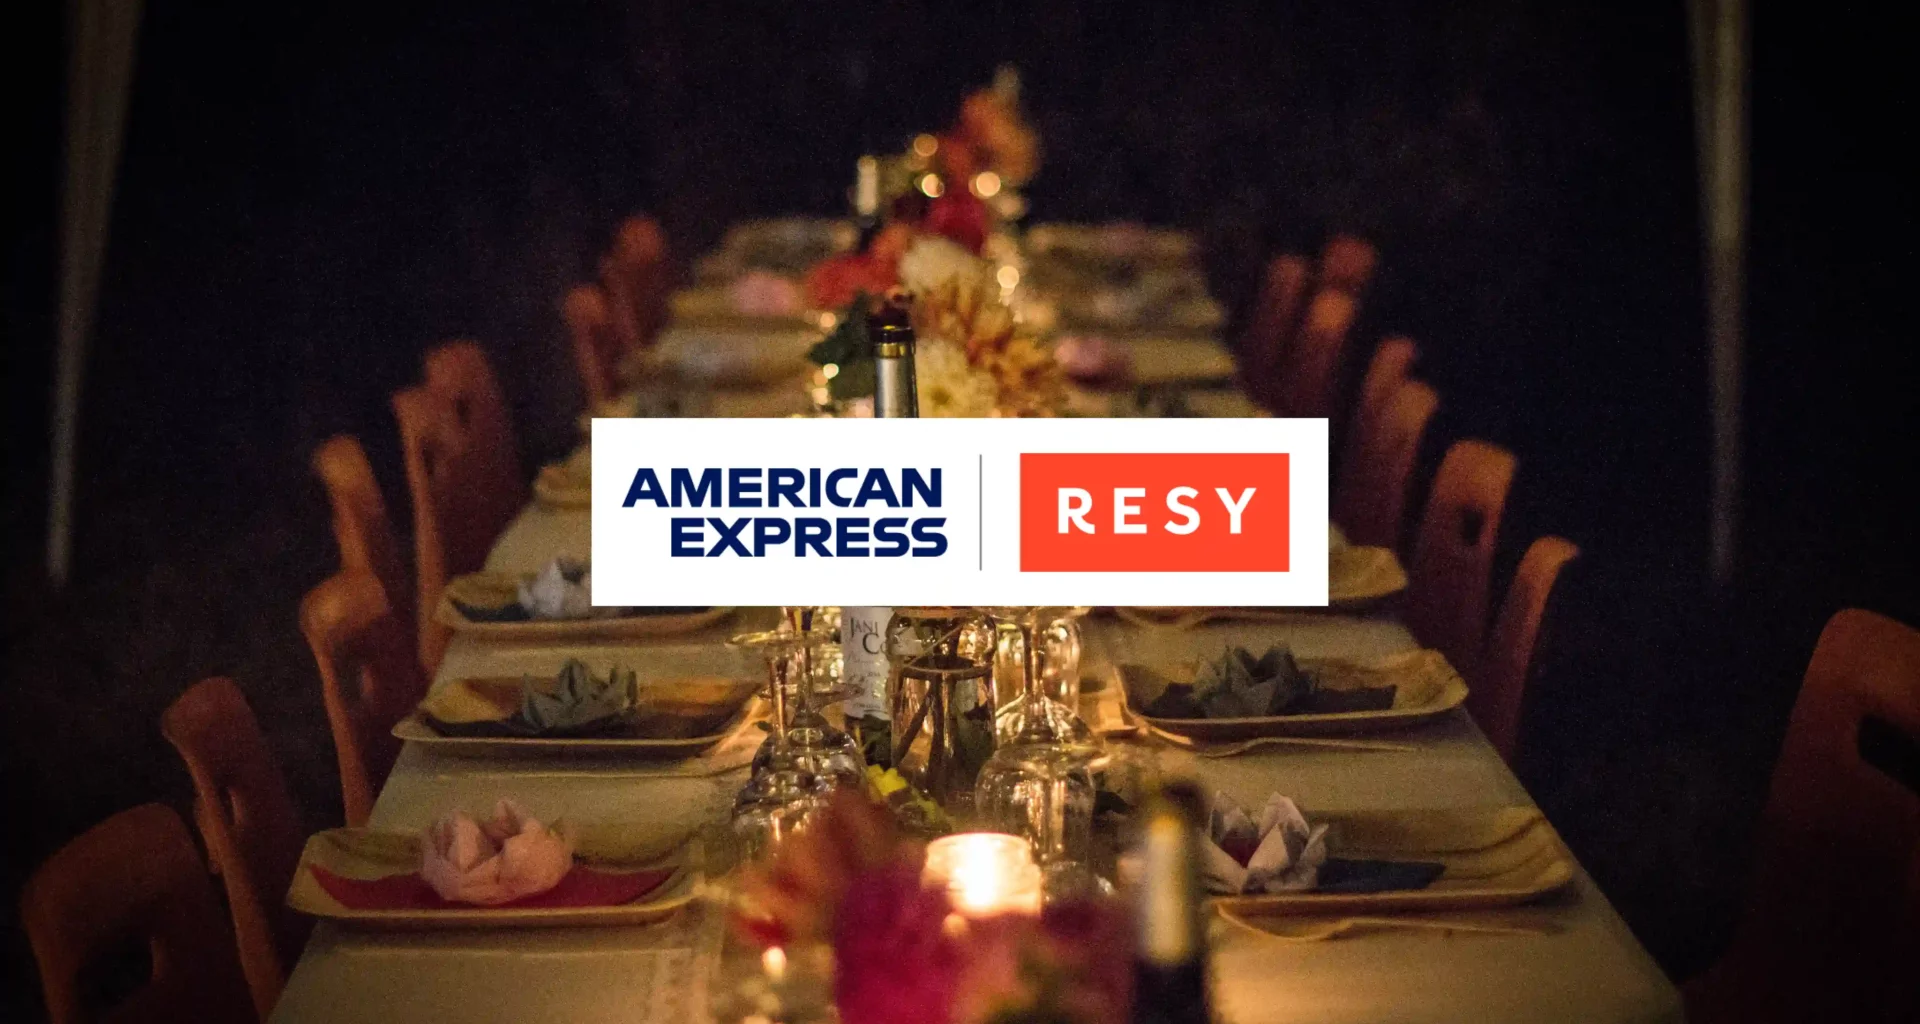 American Express and Resy logos on top of laid table